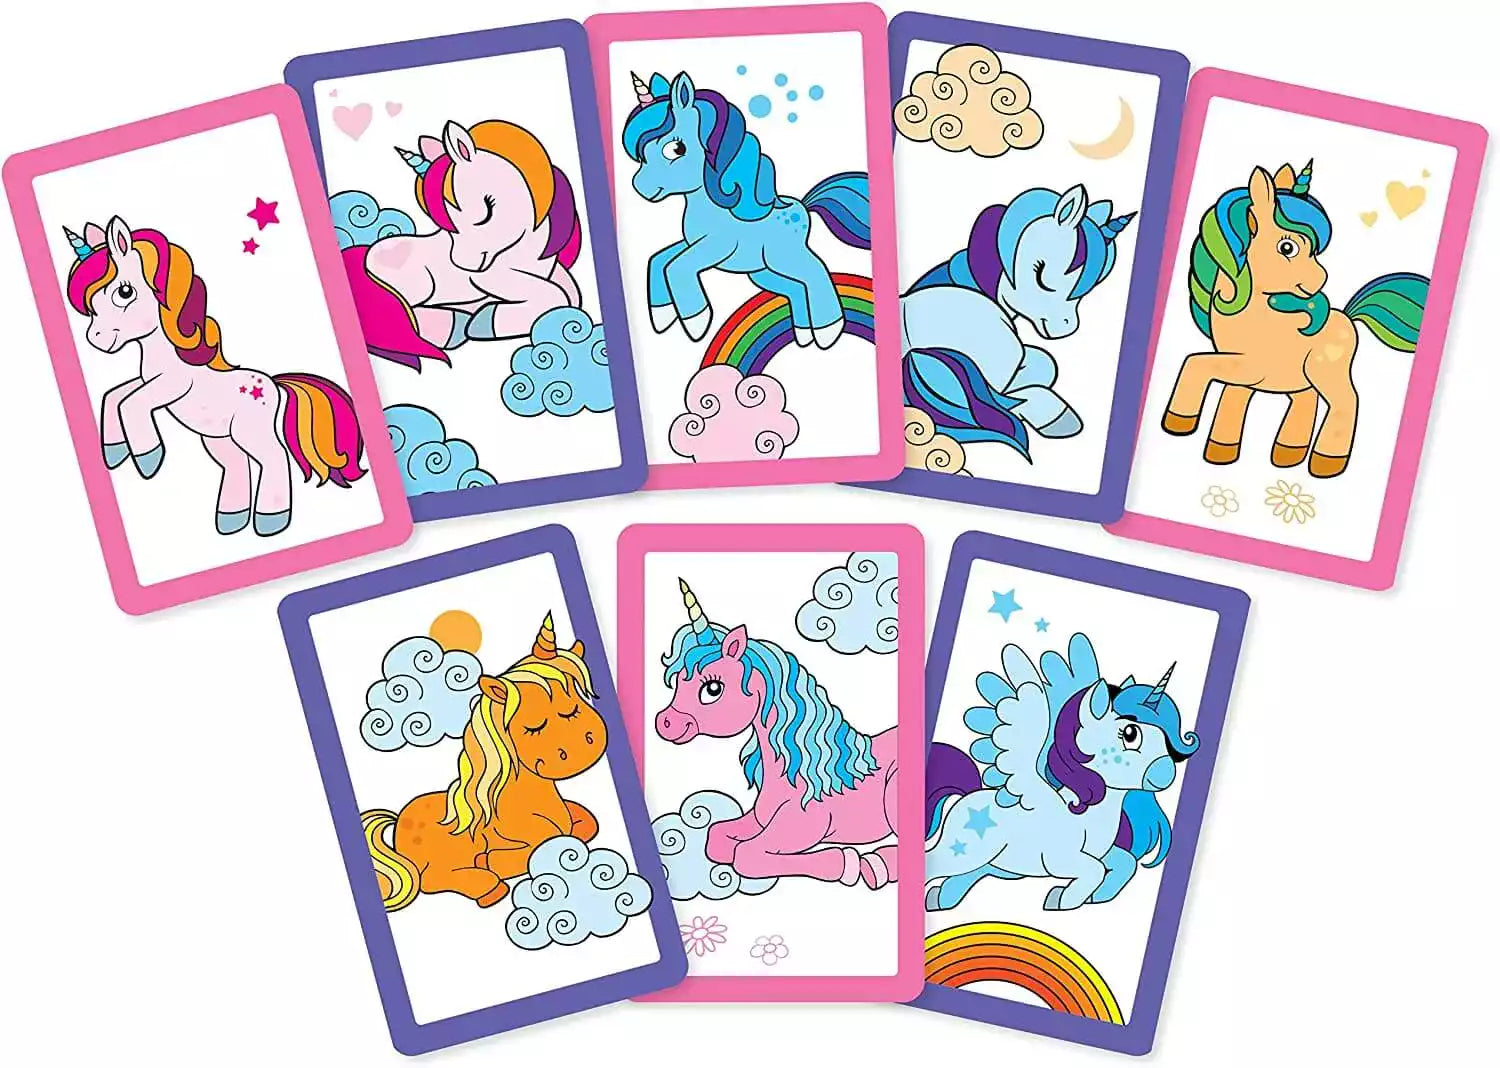 shop brainteasers for children - cheatwell games - shop unicorn card game for children at The Toy Room